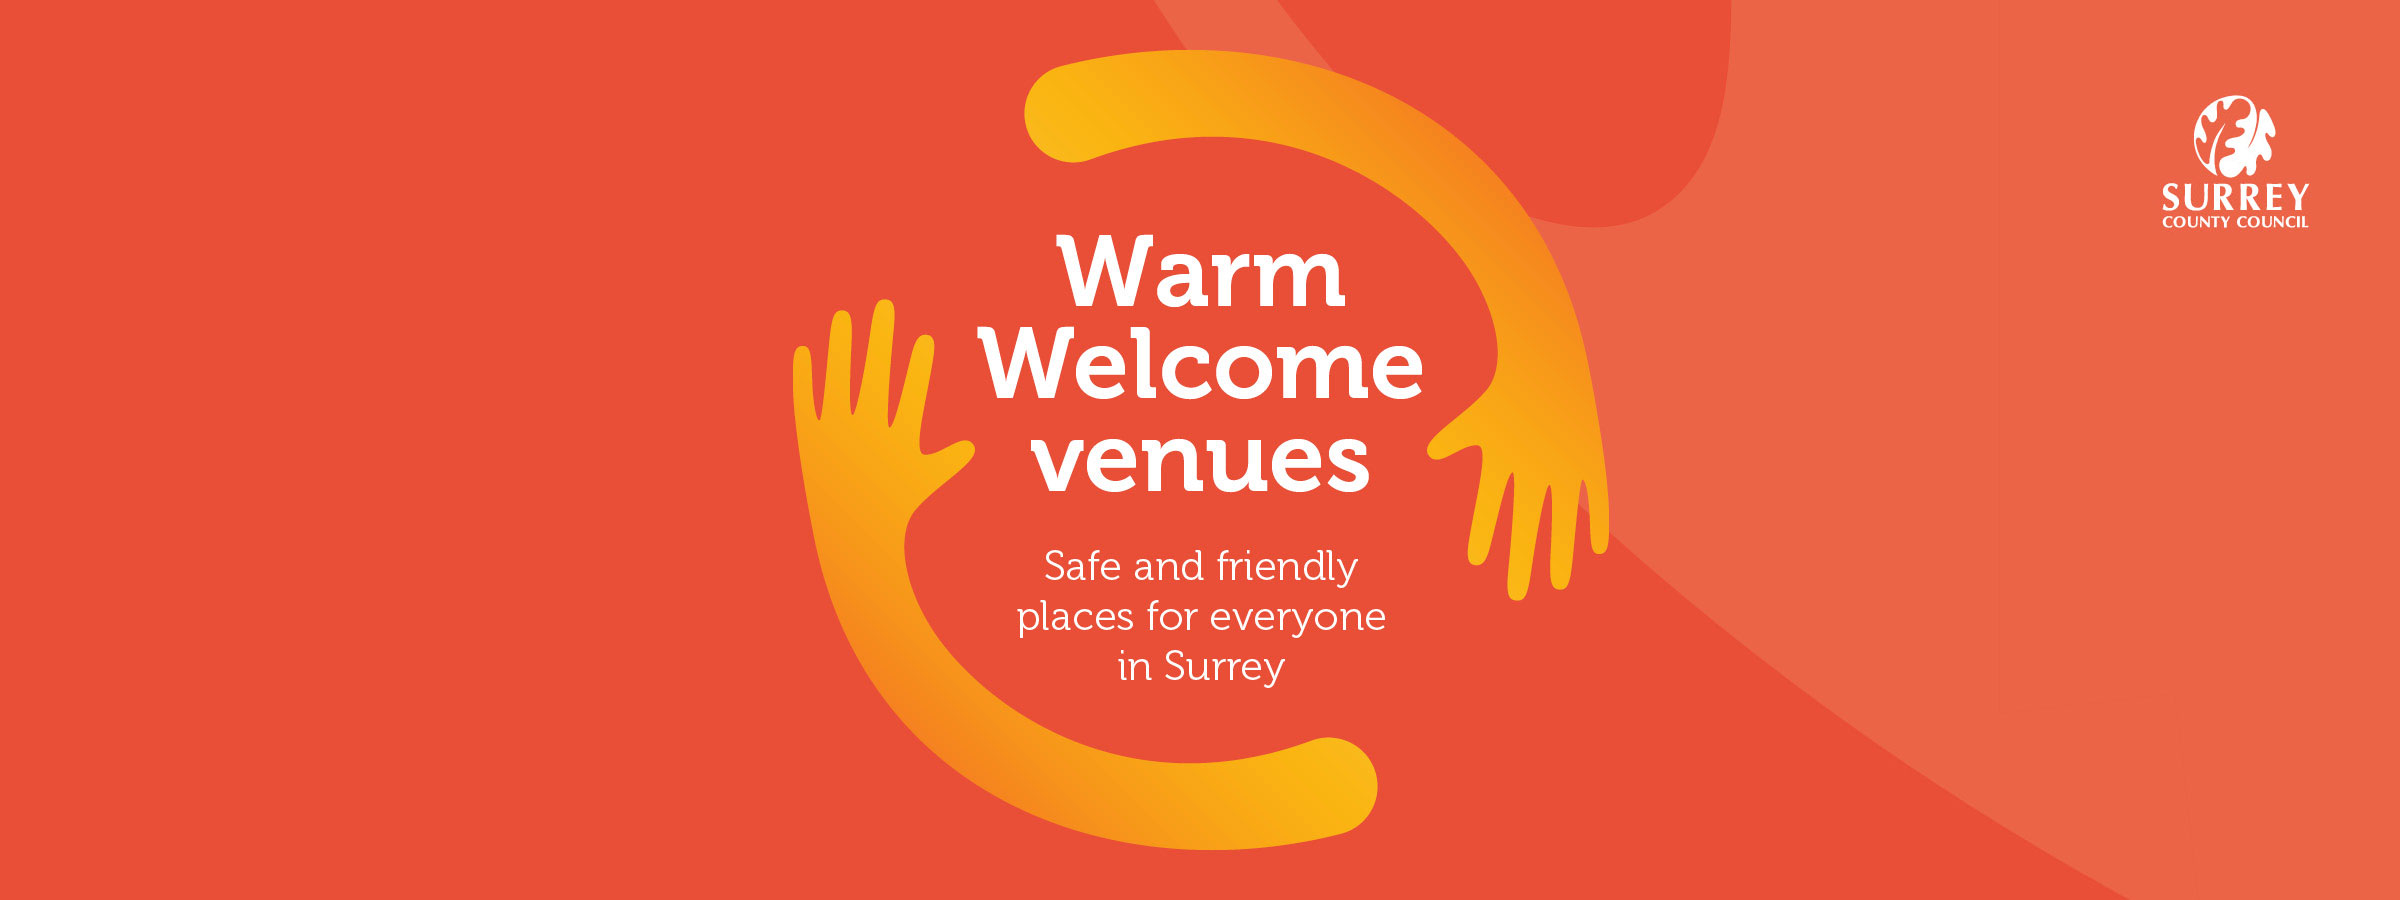 Warm Welcome Venues logo from Surrey County Council